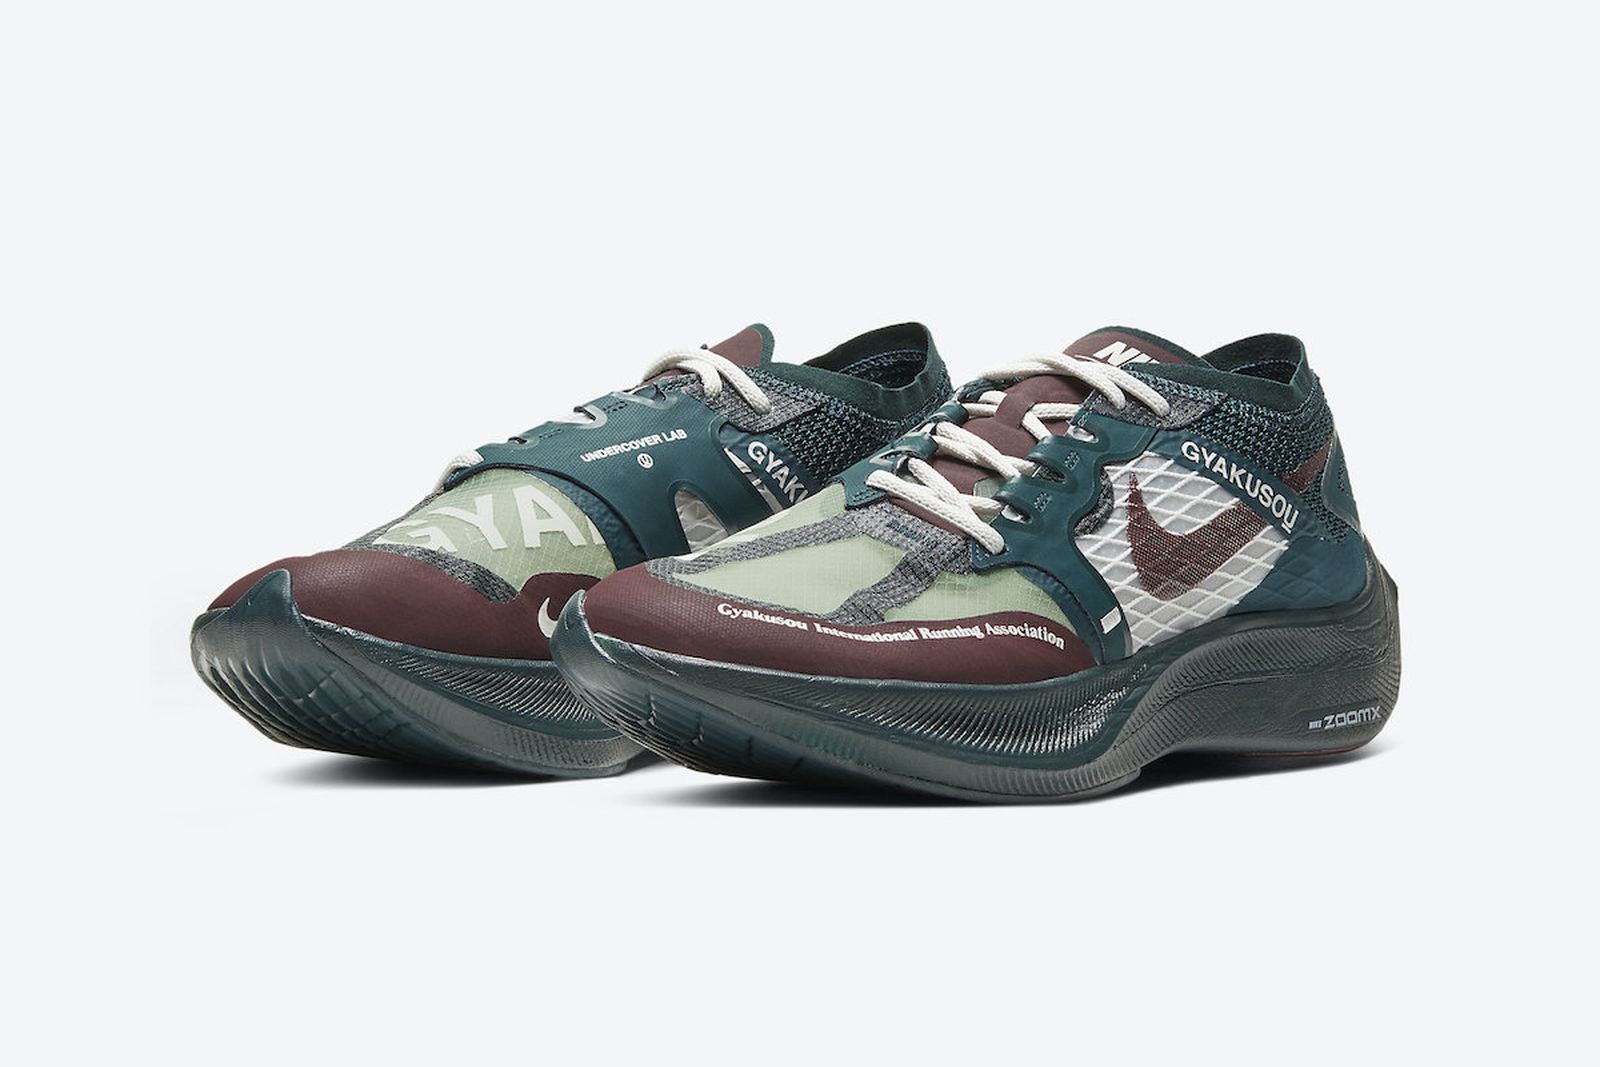 undercover-nike-zoomx-vaporfly-next-2-release-date-price-07